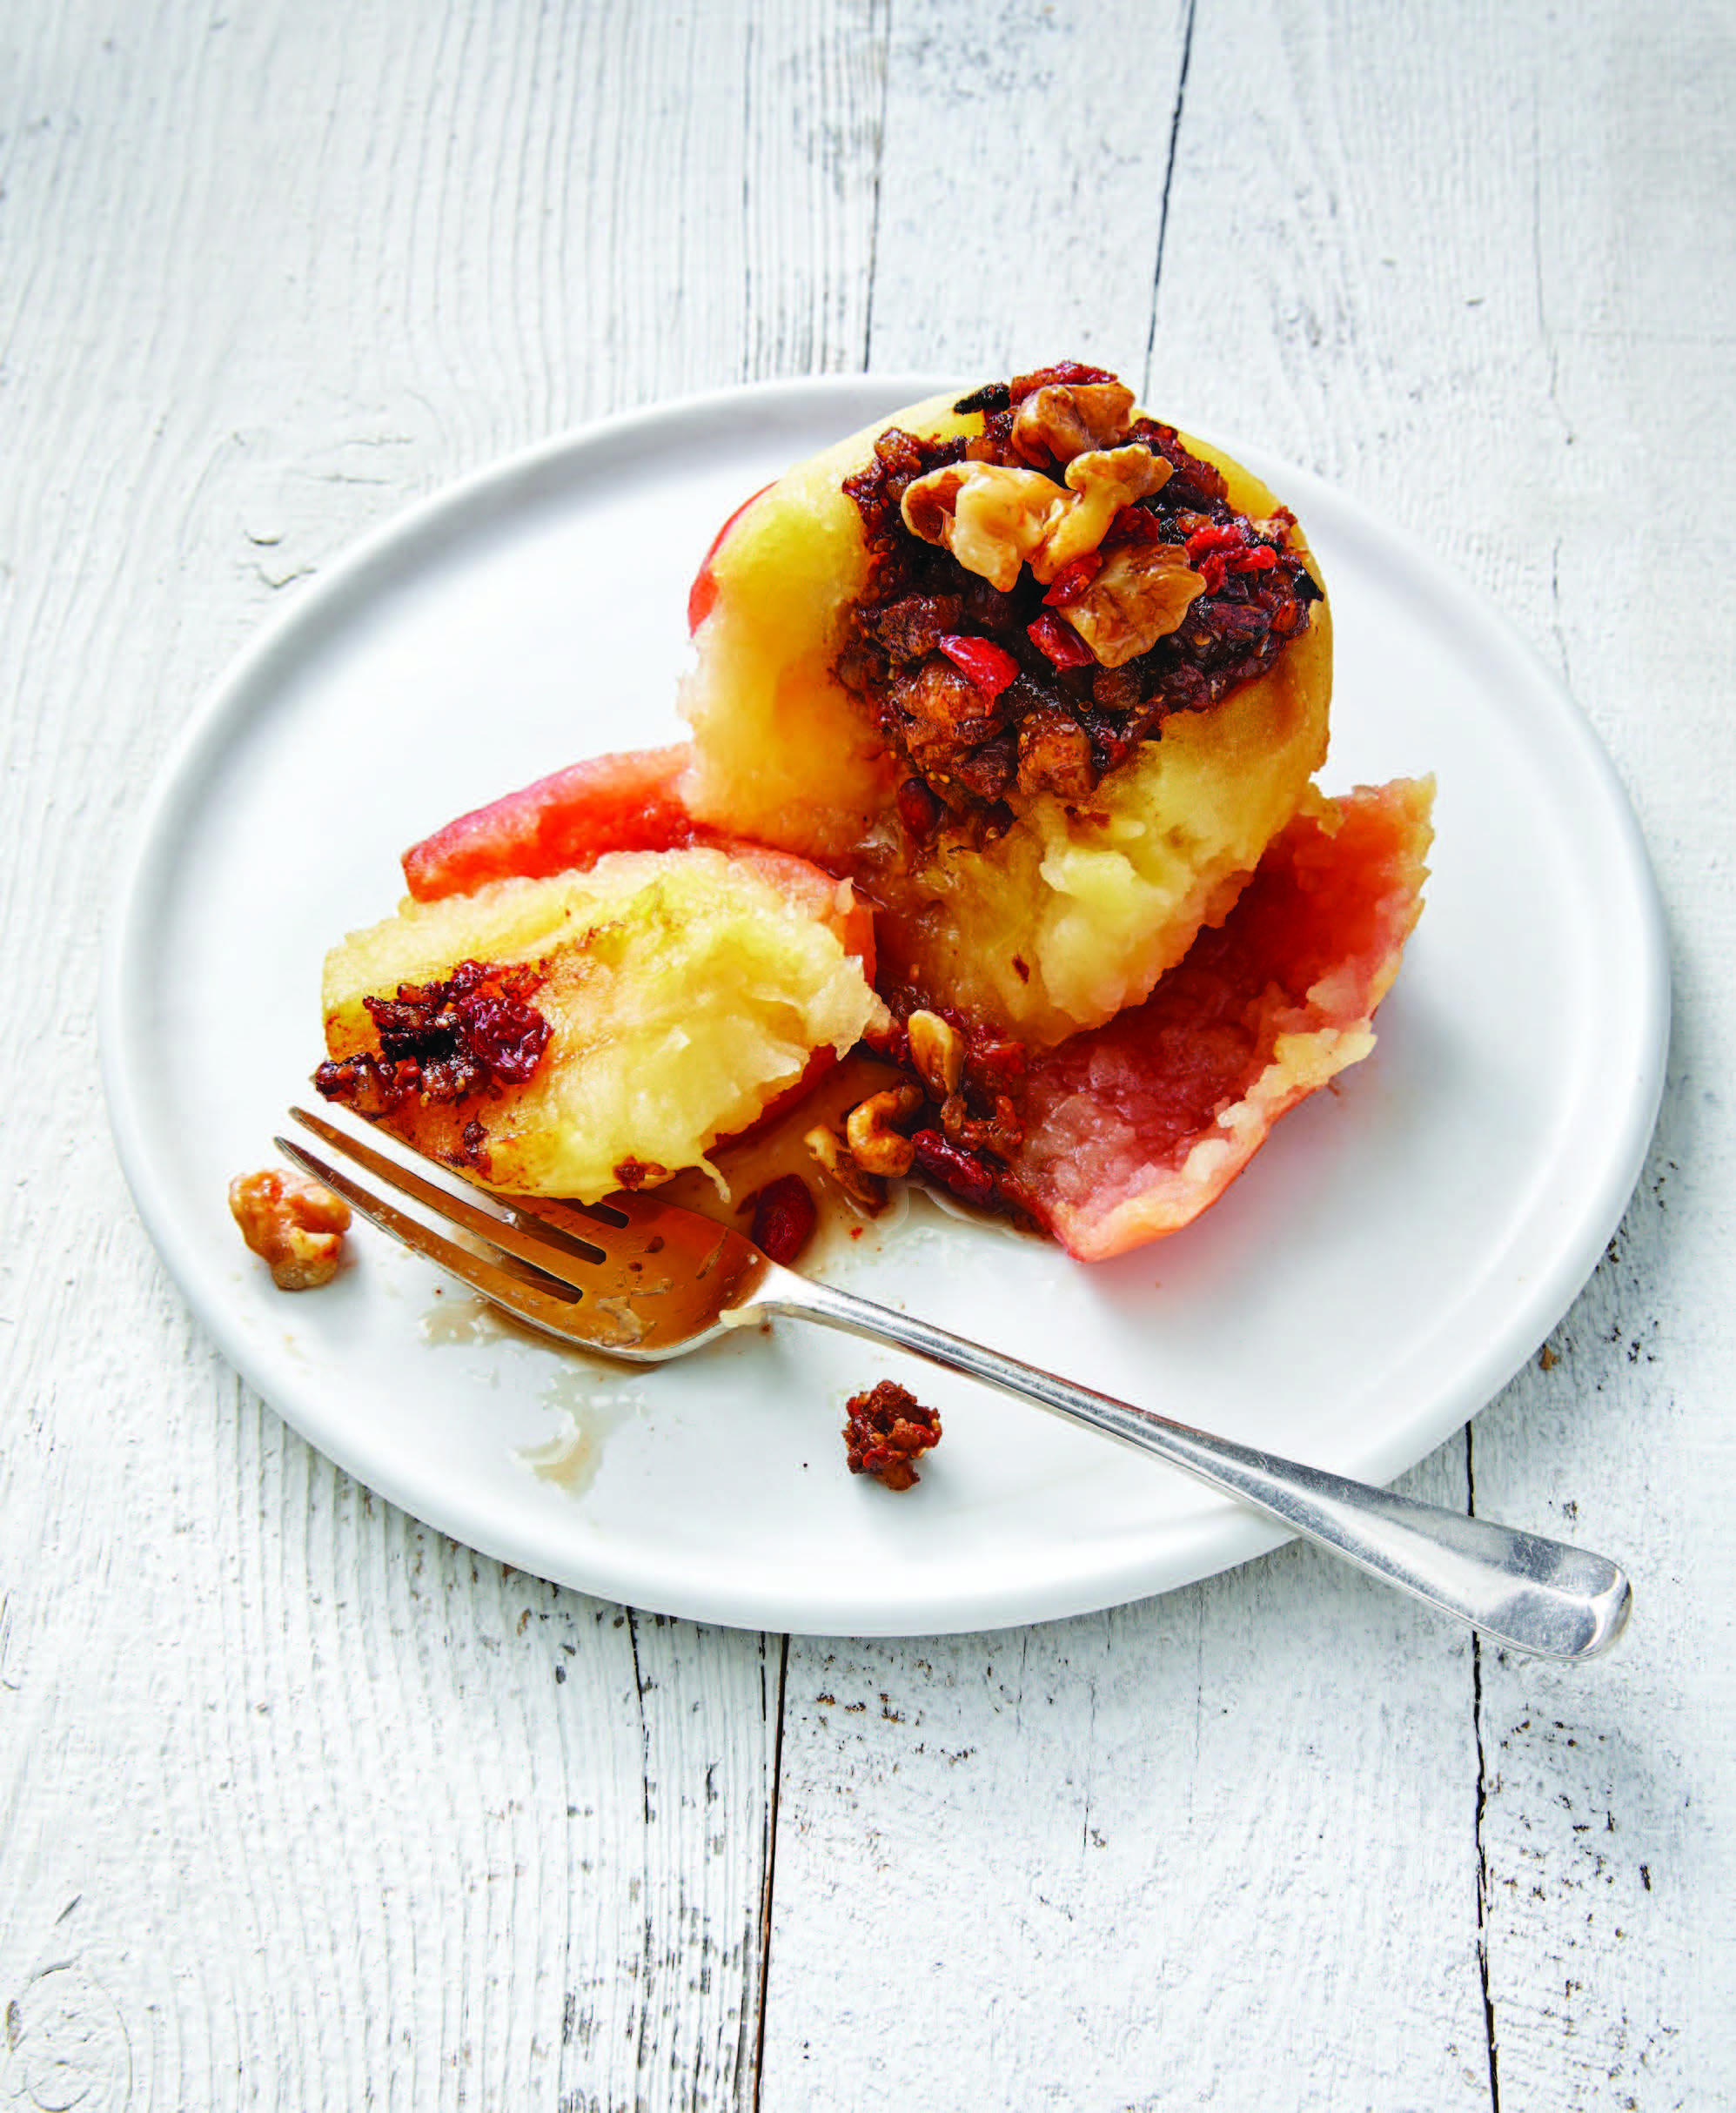 https://nutritionfacts.org/app/uploads/2020/12/Baked-Apples-with-walnuts-and-Goji-Berries-photo.jpg